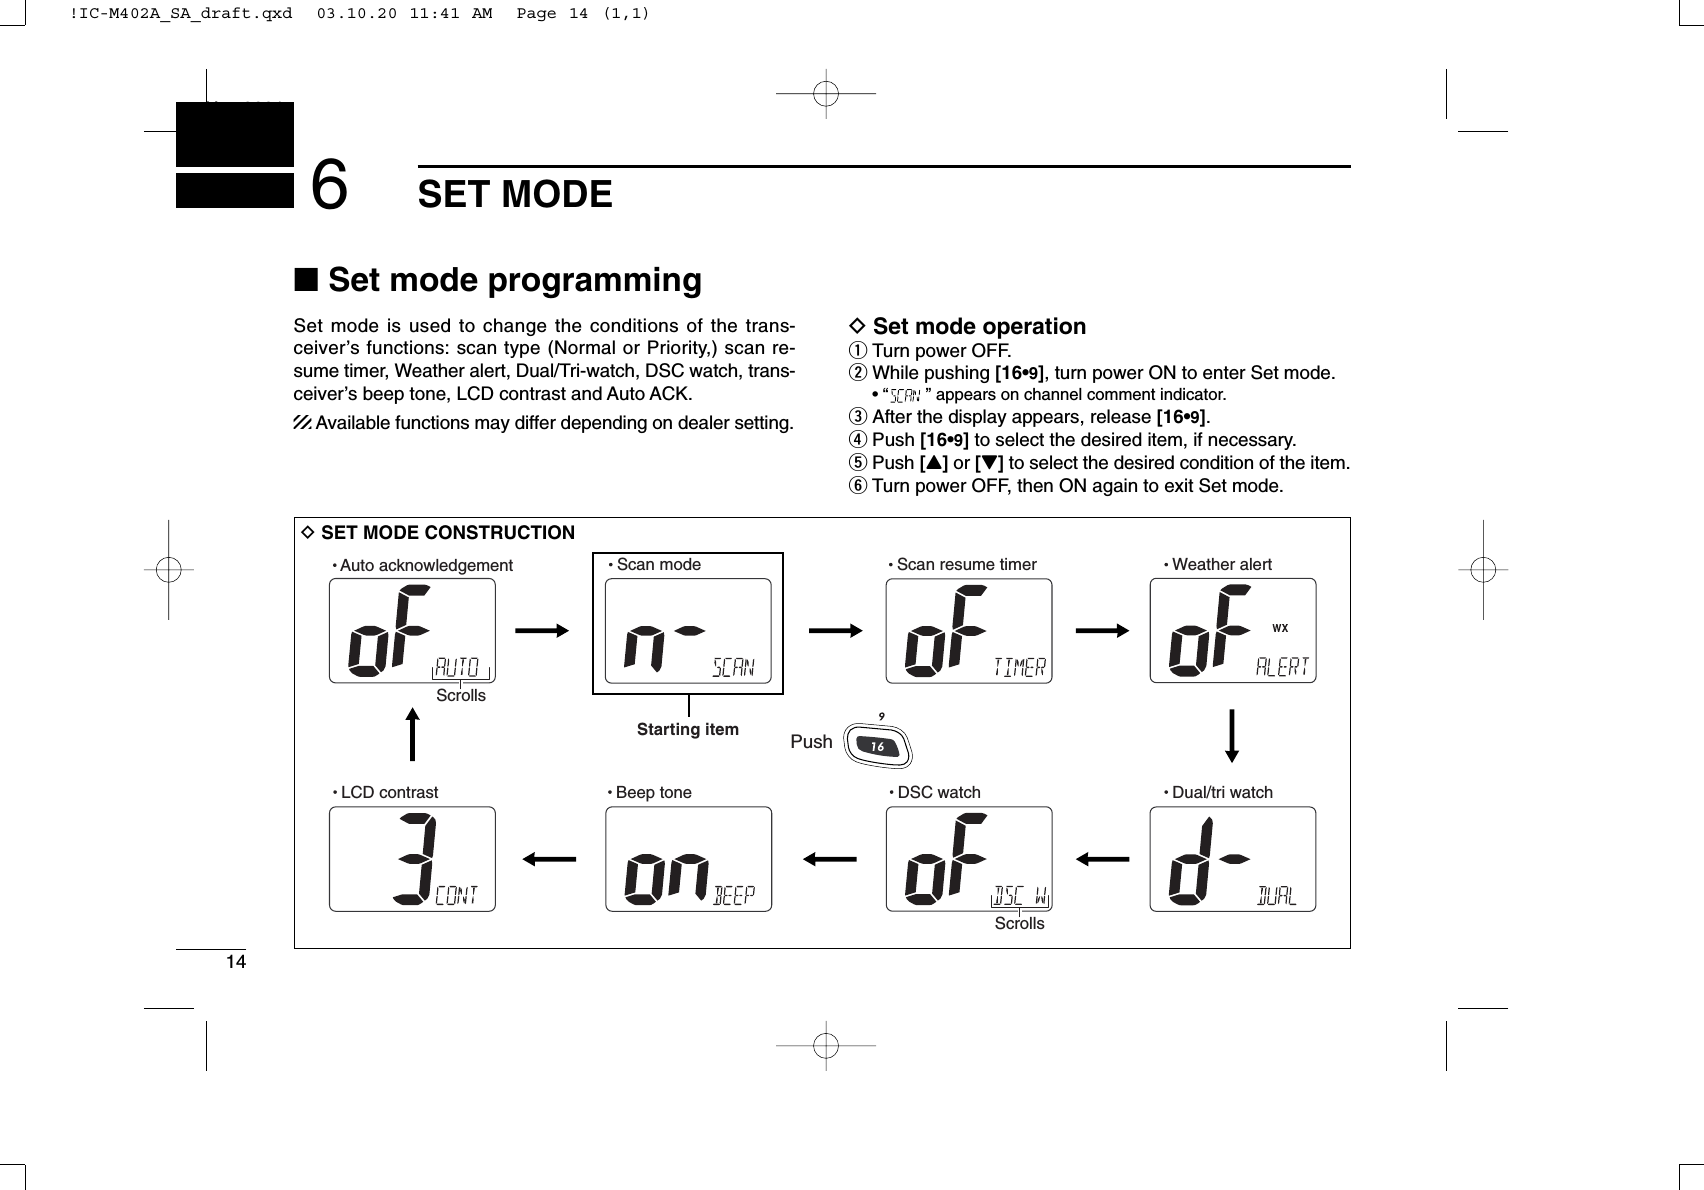 14SET MODENew20016■Set mode programmingSet mode is used to change the conditions of the trans-ceiver’s functions: scan type (Normal or Priority,) scan re-sume timer, Weather alert, Dual/Tri-watch, DSC watch, trans-ceiver’s beep tone, LCD contrast and Auto ACK.Available functions may differ depending on dealer setting.DSet mode operationqTurn power OFF.wWhile pushing [16•9], turn power ON to enter Set mode.• “” appears on channel comment indicator.eAfter the display appears, release [16•9].rPush [16•9]to select the desired item, if necessary.tPush [Y]or [Z]to select the desired condition of the item.yTurn power OFF, then ON again to exit Set mode.DSET MODE CONSTRUCTION  Beep tone  LCD contrastStarting item  Scan mode   Scan resume timer   Weather alert  Dual/tri watch  DSC watch  Auto acknowledgementScrollsPushScrolls!IC-M402A_SA_draft.qxd  03.10.20 11:41 AM  Page 14 (1,1)